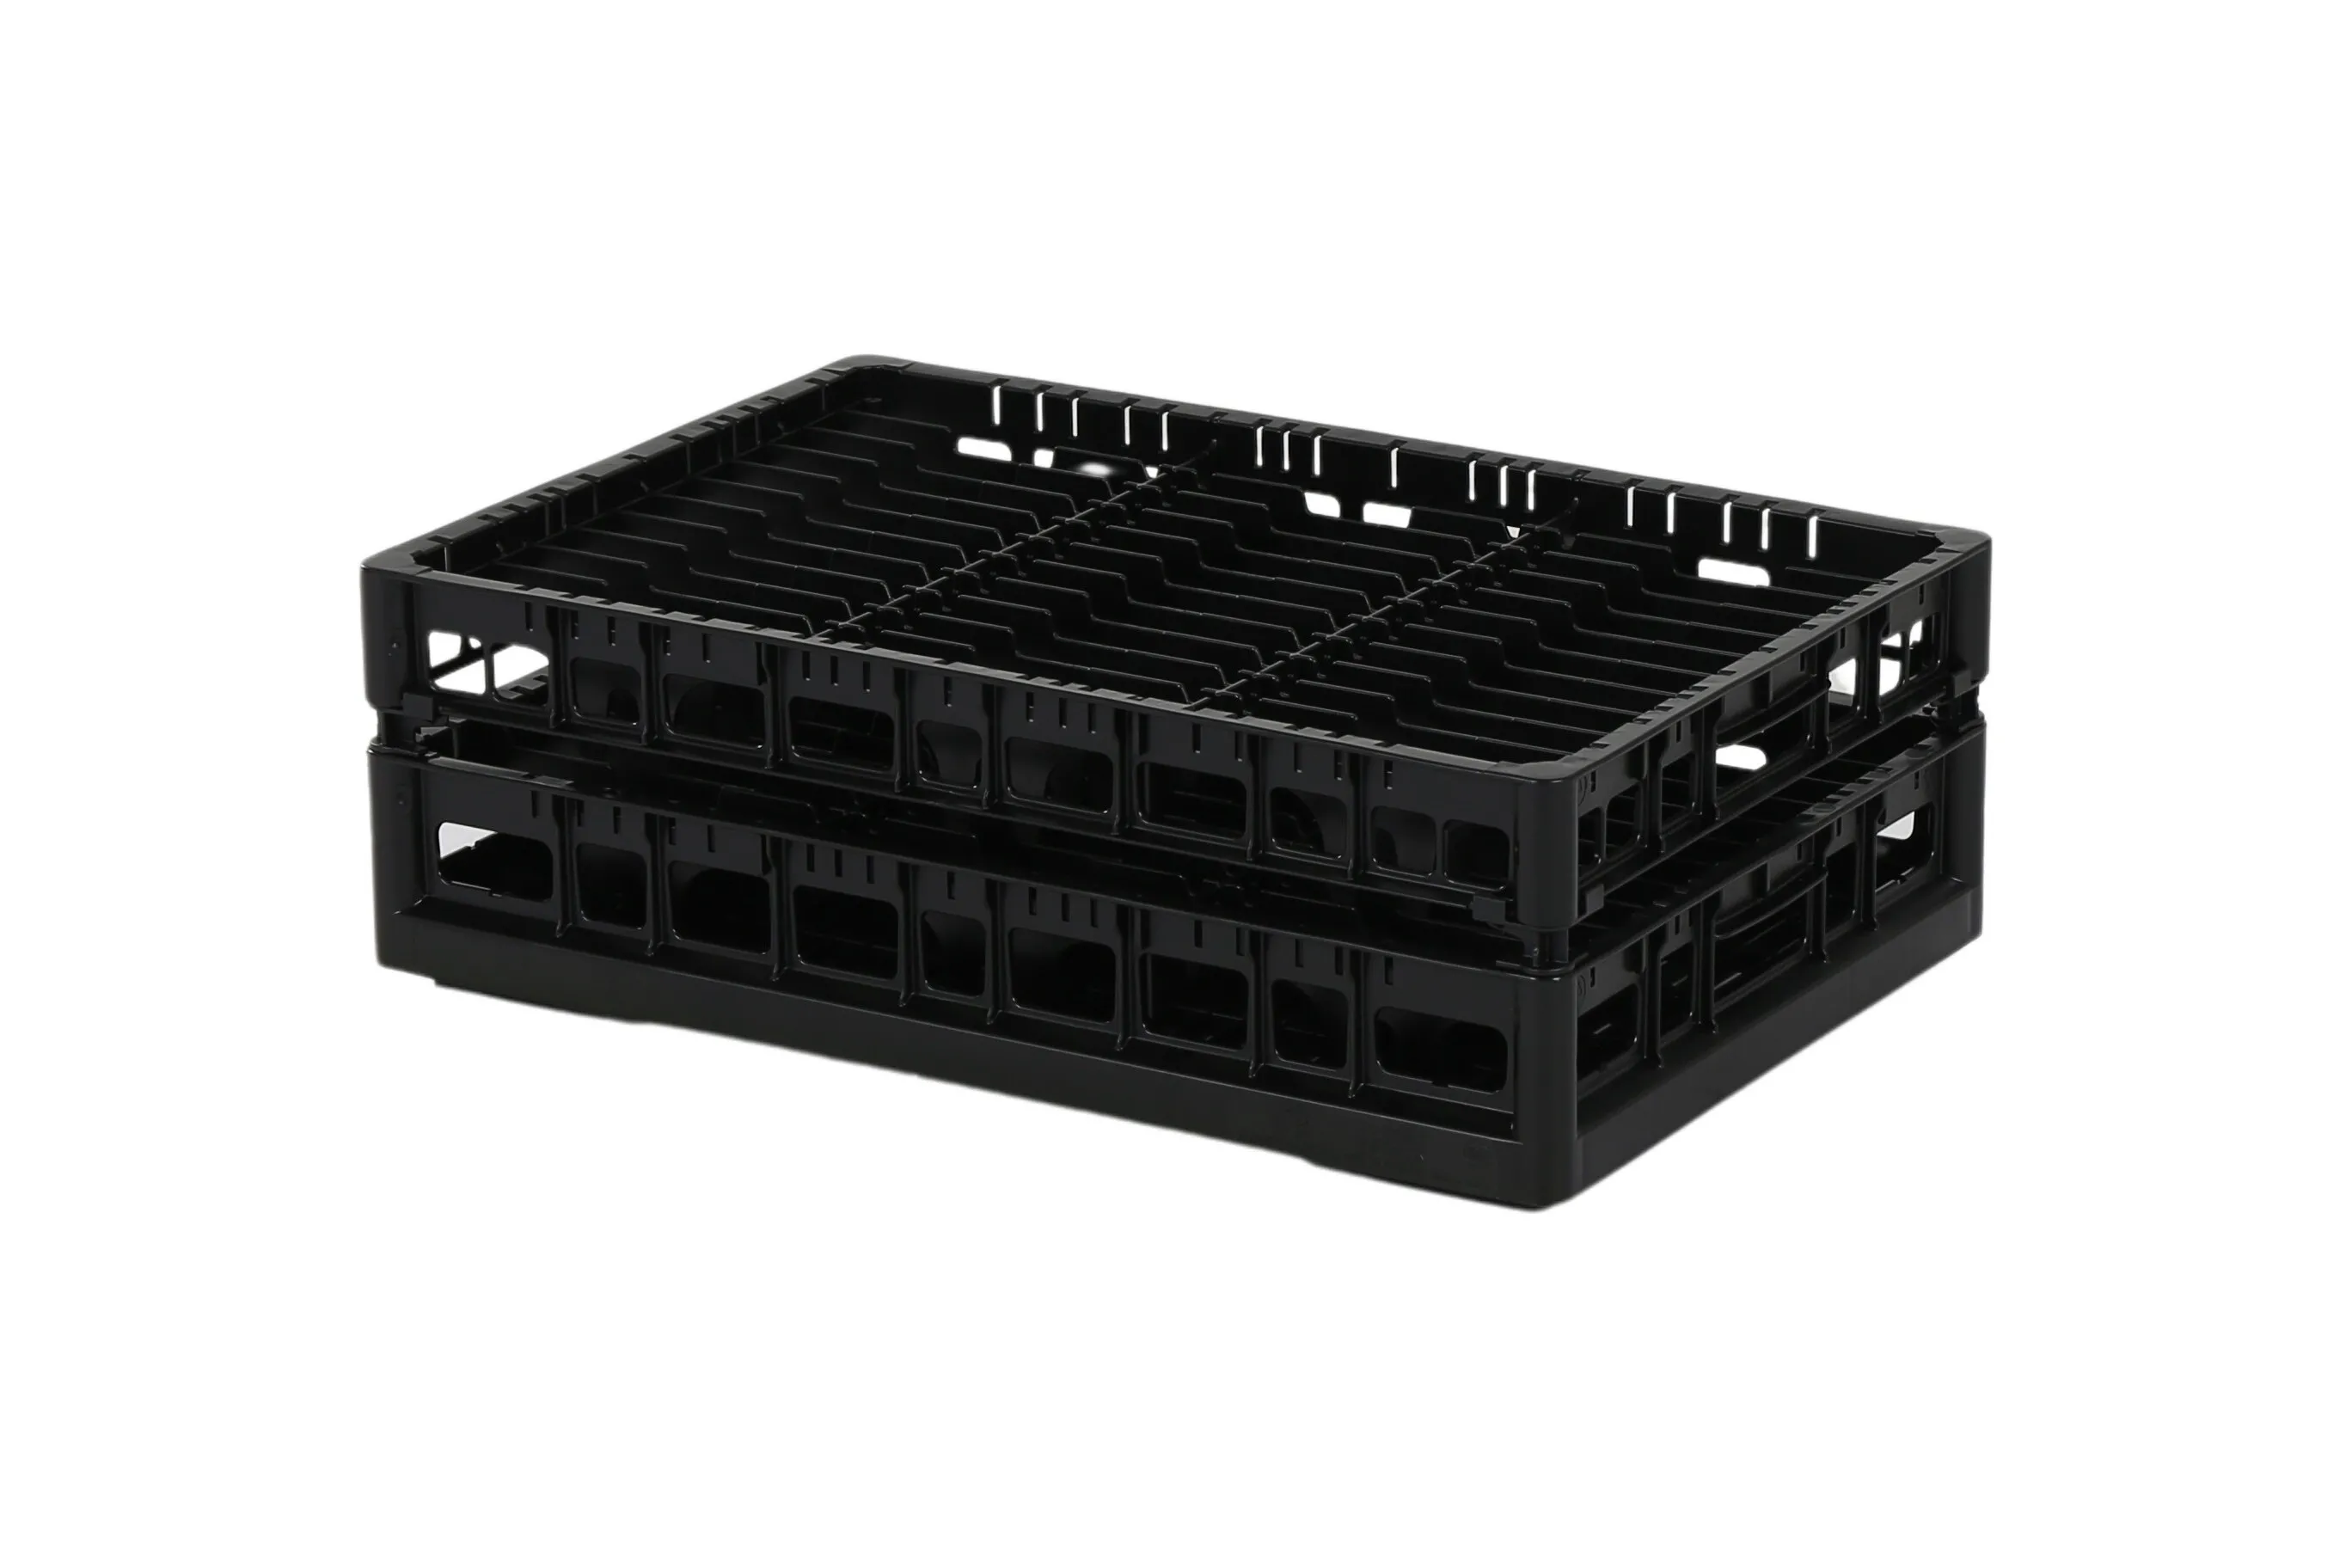 Clixrack Plate basket 600 x 400 mm black - Plate height max. 28mm - with 3 x 12 compartment division - maximum Ø plate 155 mm 